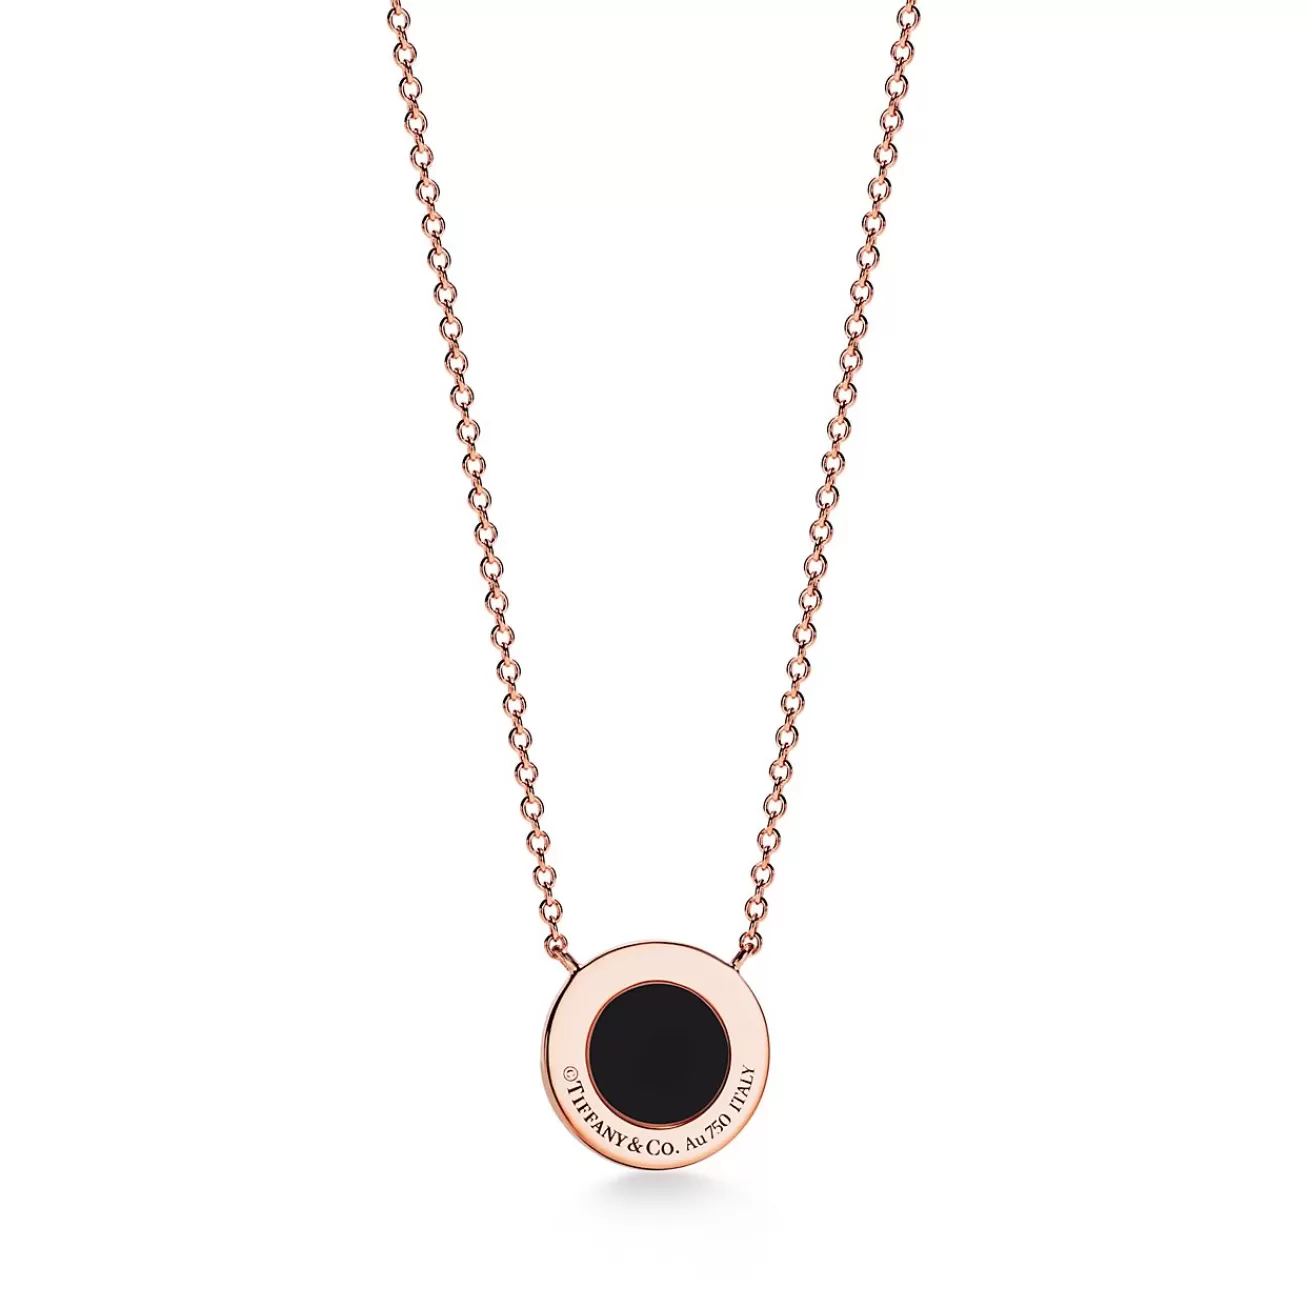 Tiffany & Co. Tiffany T diamond and black onyx circle pendant in 18k rose gold, small. | ^ Necklaces & Pendants | Men's Jewelry